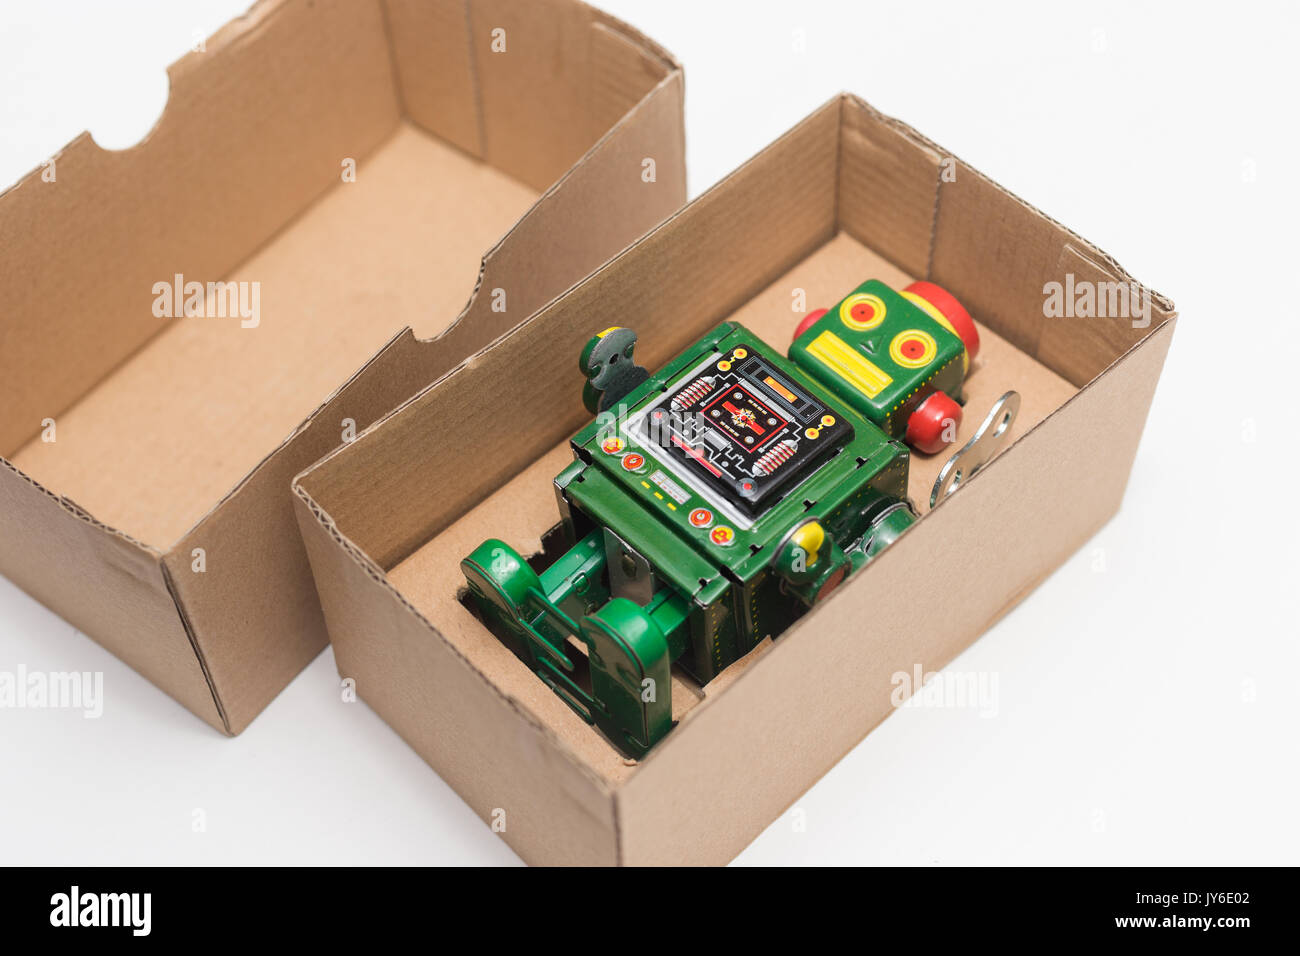 A Look Inside the Robot Box